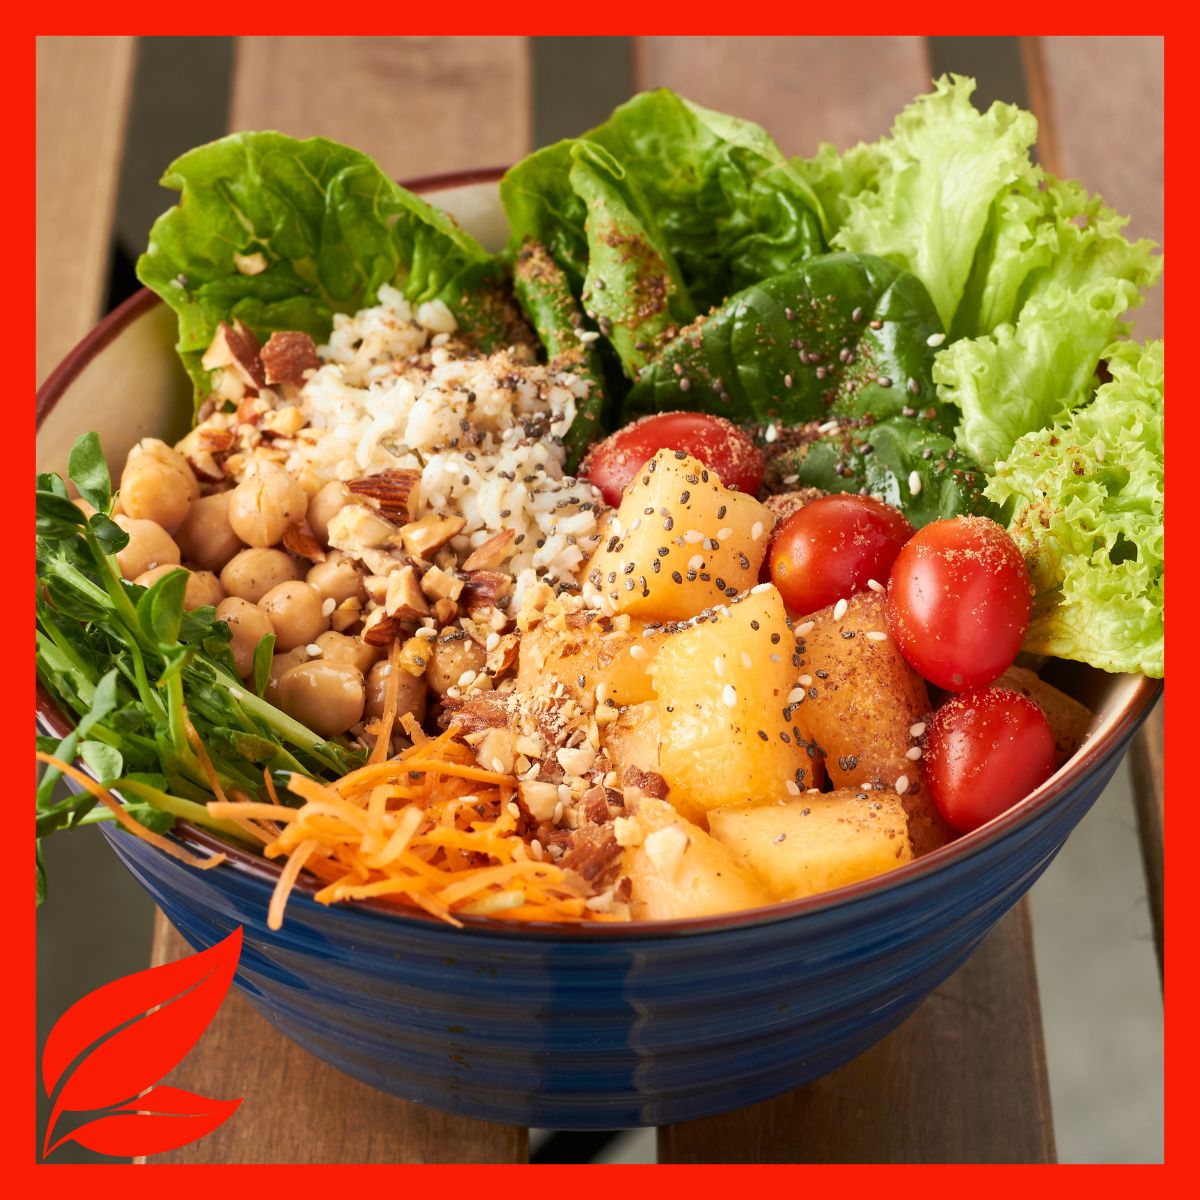 A salad bowl with lettuce, tomatoes, nuts, chickpeas, and more. 